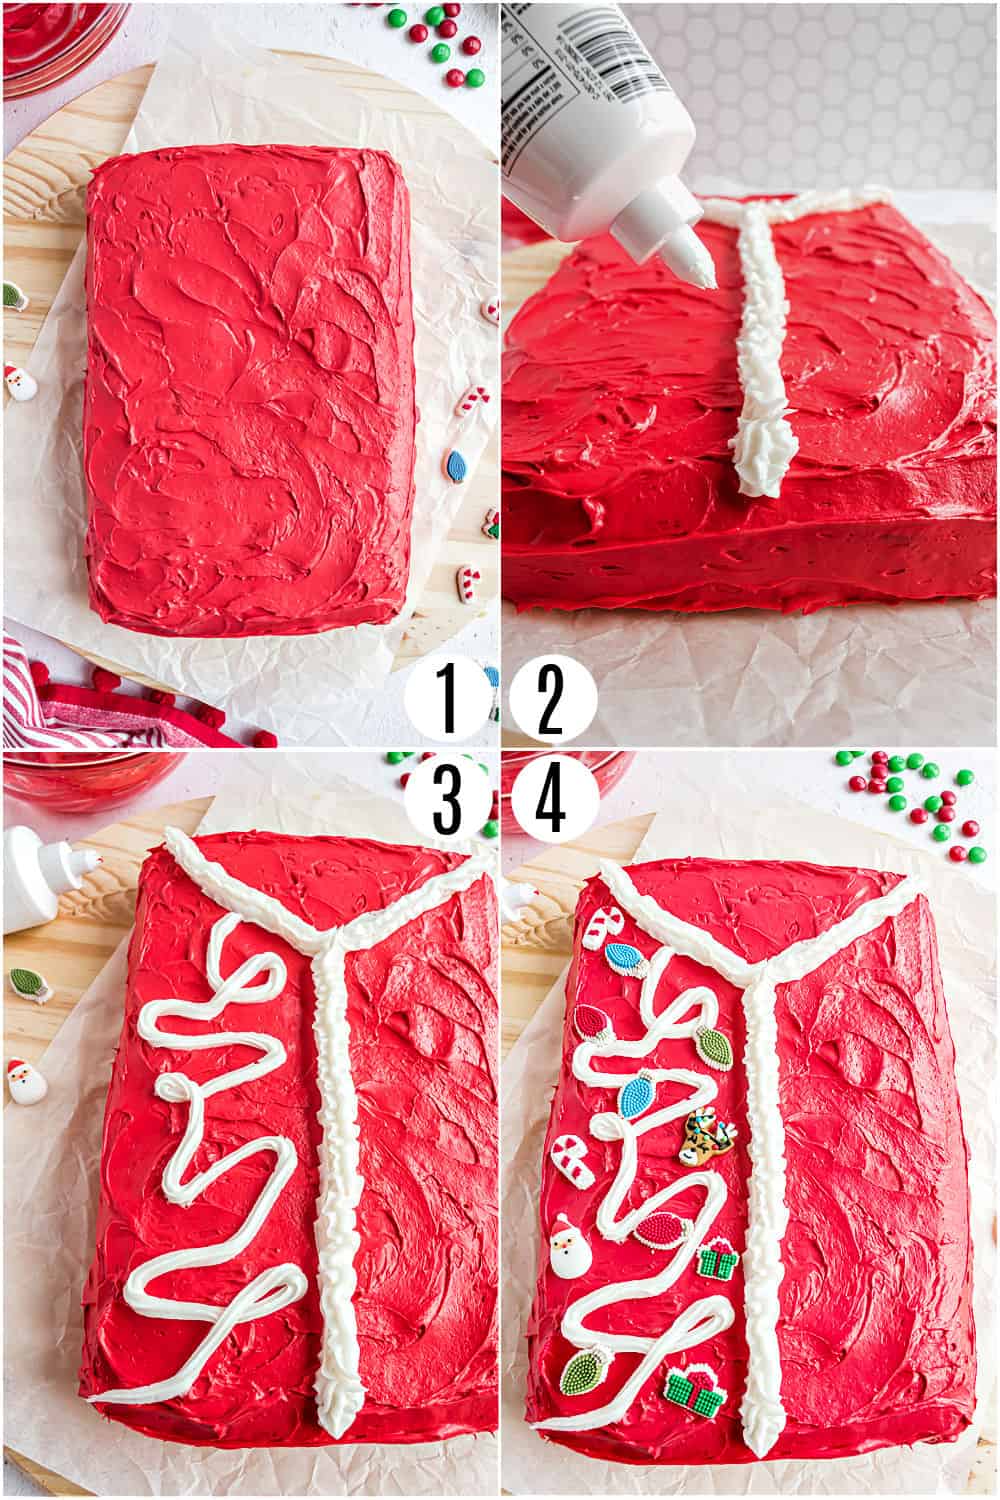 Step by step photos showing how to make an ugly sweater cake.